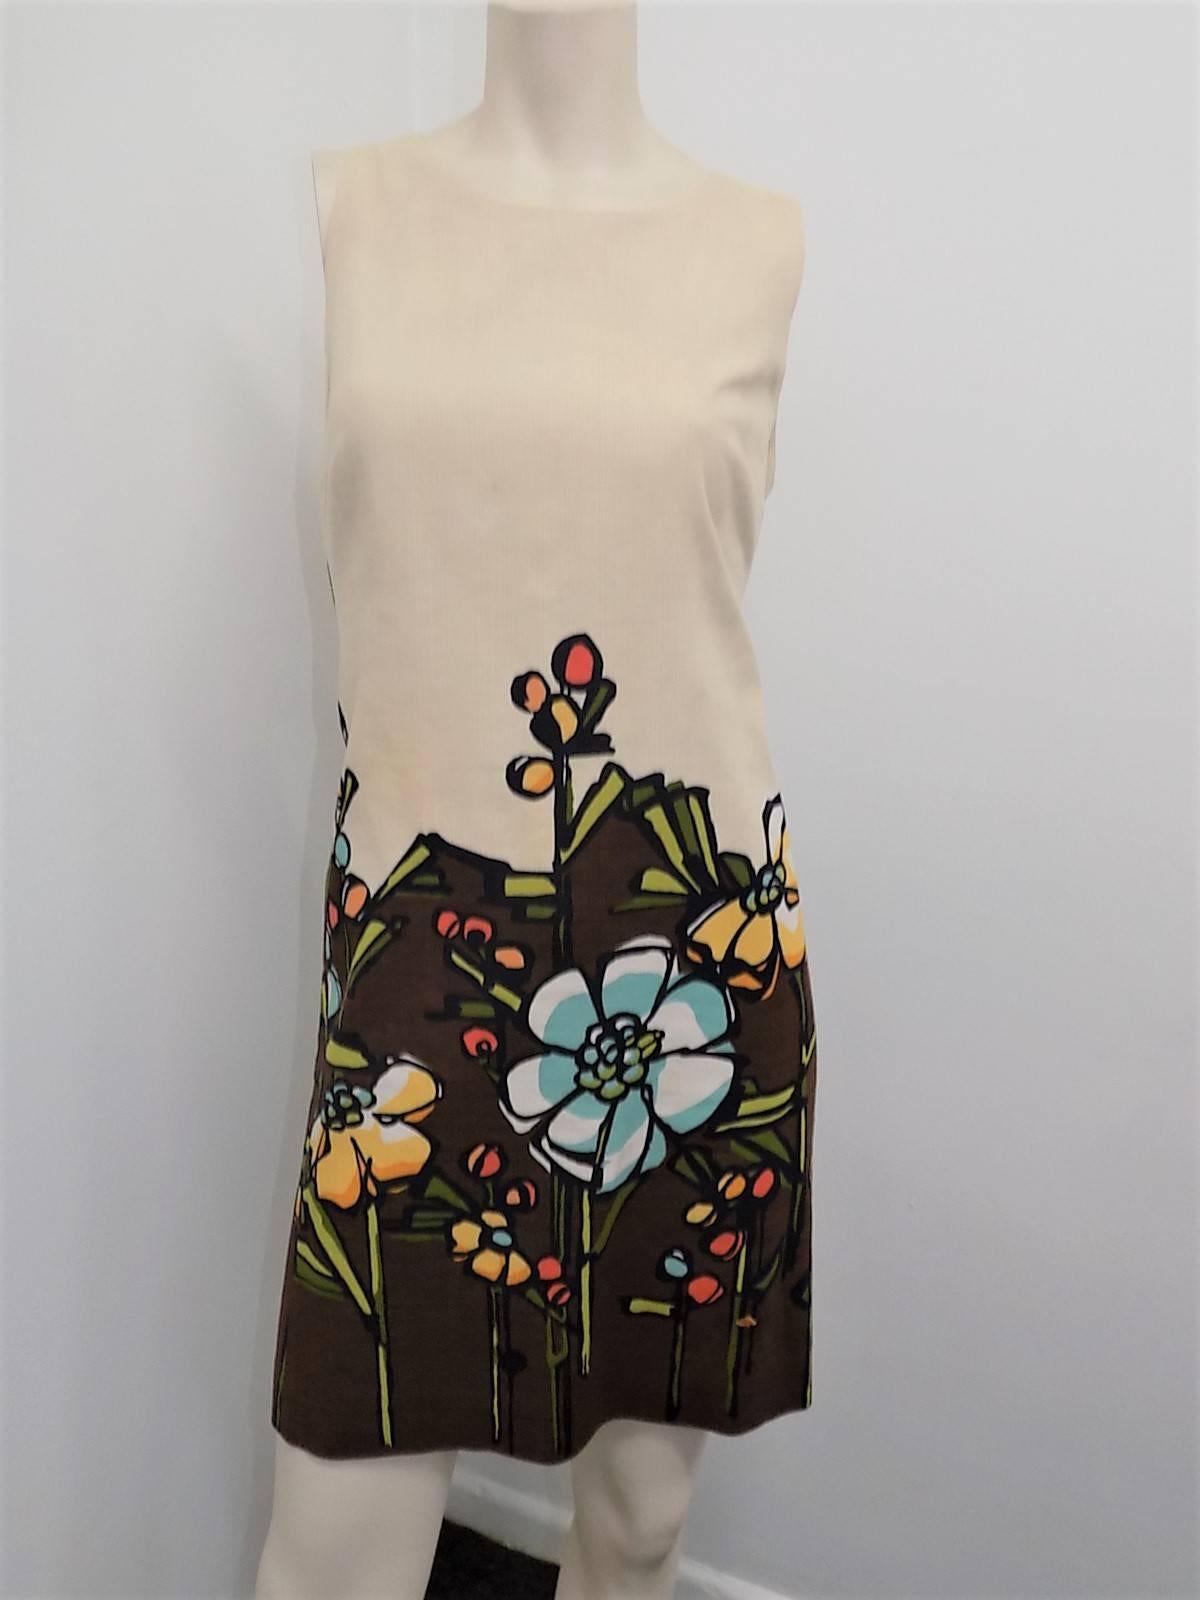 Spectacular Moschino  Cheap and Chic Rare d  Dress and Jacket Cotton  Ensemble. Inspired by 1960" fashion  sleeveless sheath dress  with cropped jacket featuring wide collar and large beige buttons. Pritn looks like colored drawings or paint. 